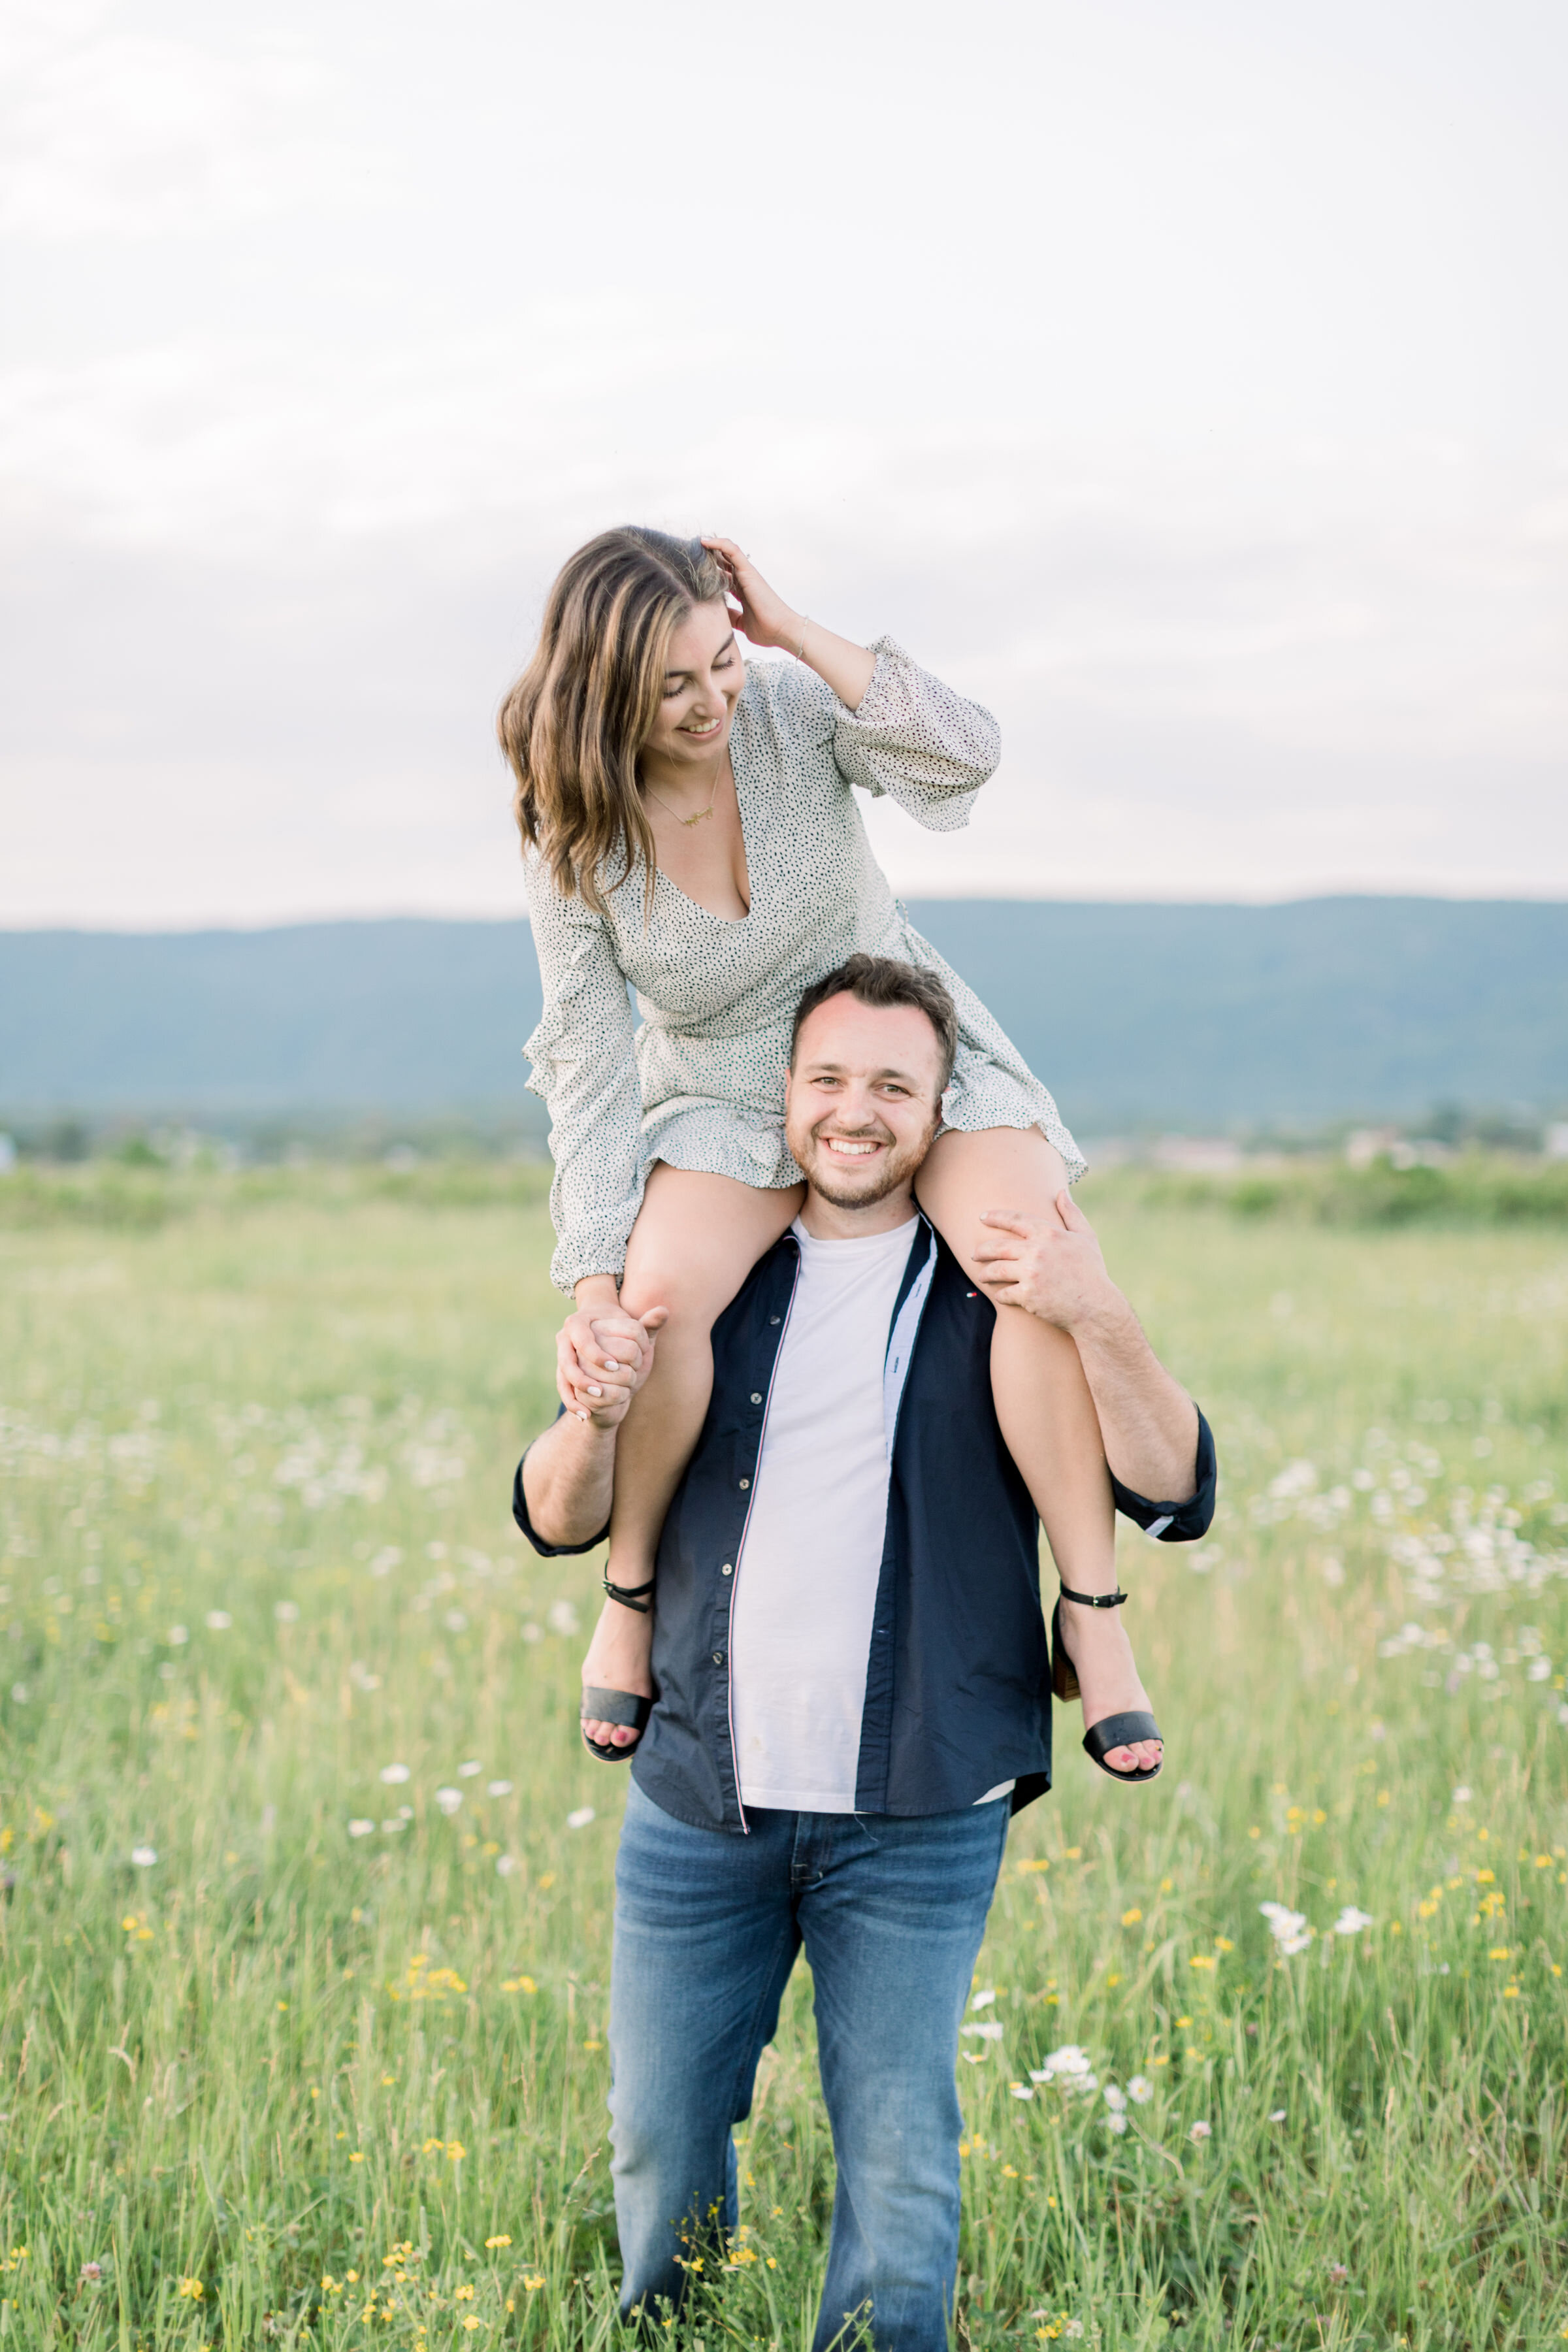  Cute couple with girl on boys shoulders in a green field in engagement photoshoot in Ottawa, ON by Chelsea Morgan Photography. engagement pose ideas posing inspo for engagements cute poses for couple photoshoot green field location in ottawa for pho